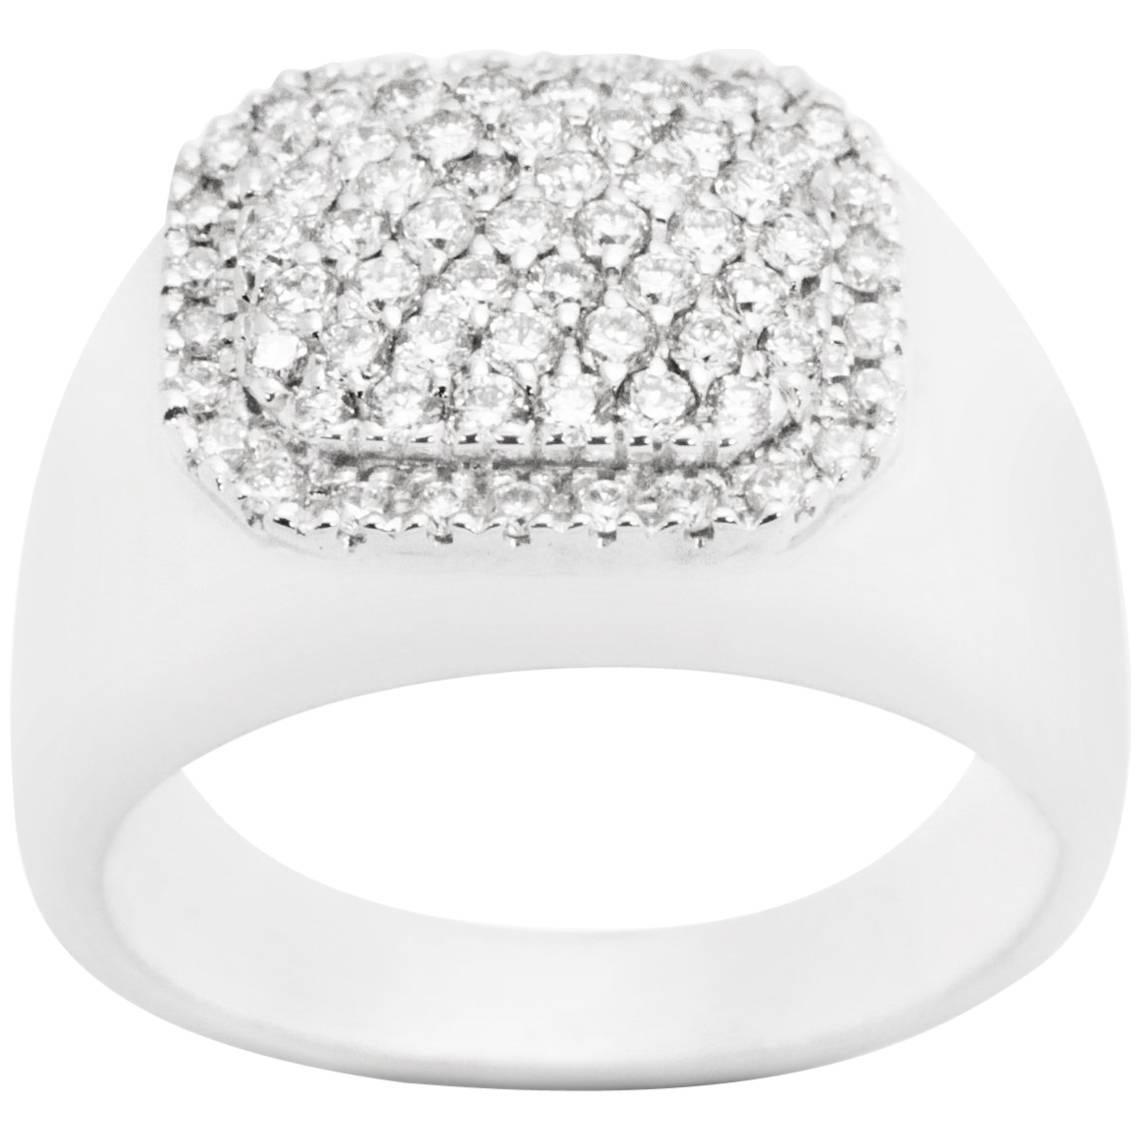 Ferrucci 0.80 Carat Diamonds White Gold Pave Dome Ring Made in Italy